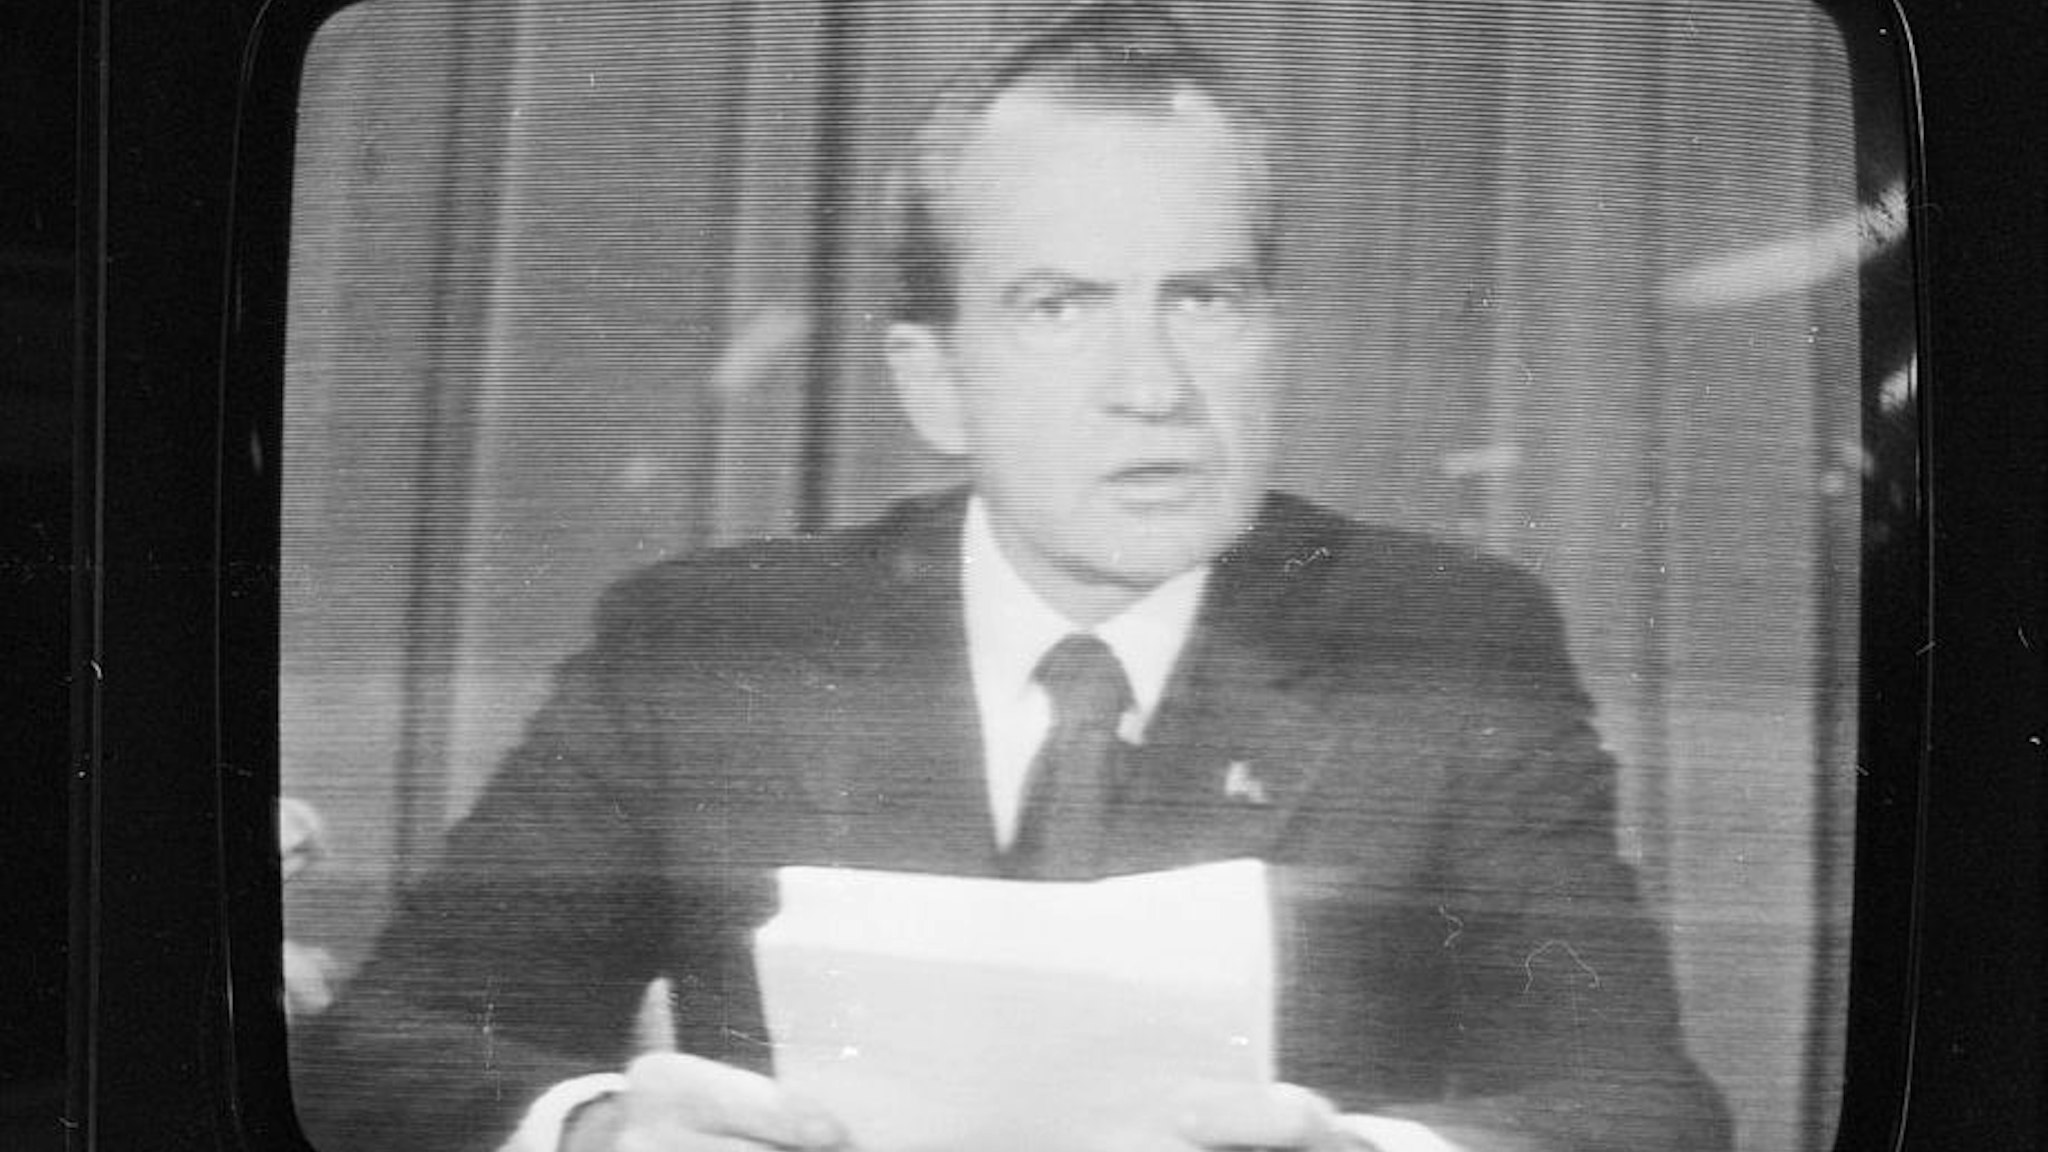 8th August 1974: American president Richard Nixon (1913 - 1994) announces his resignation on national television, following the Watergate scandal. (Photo by Pierre Manevy/Express/Getty Images)